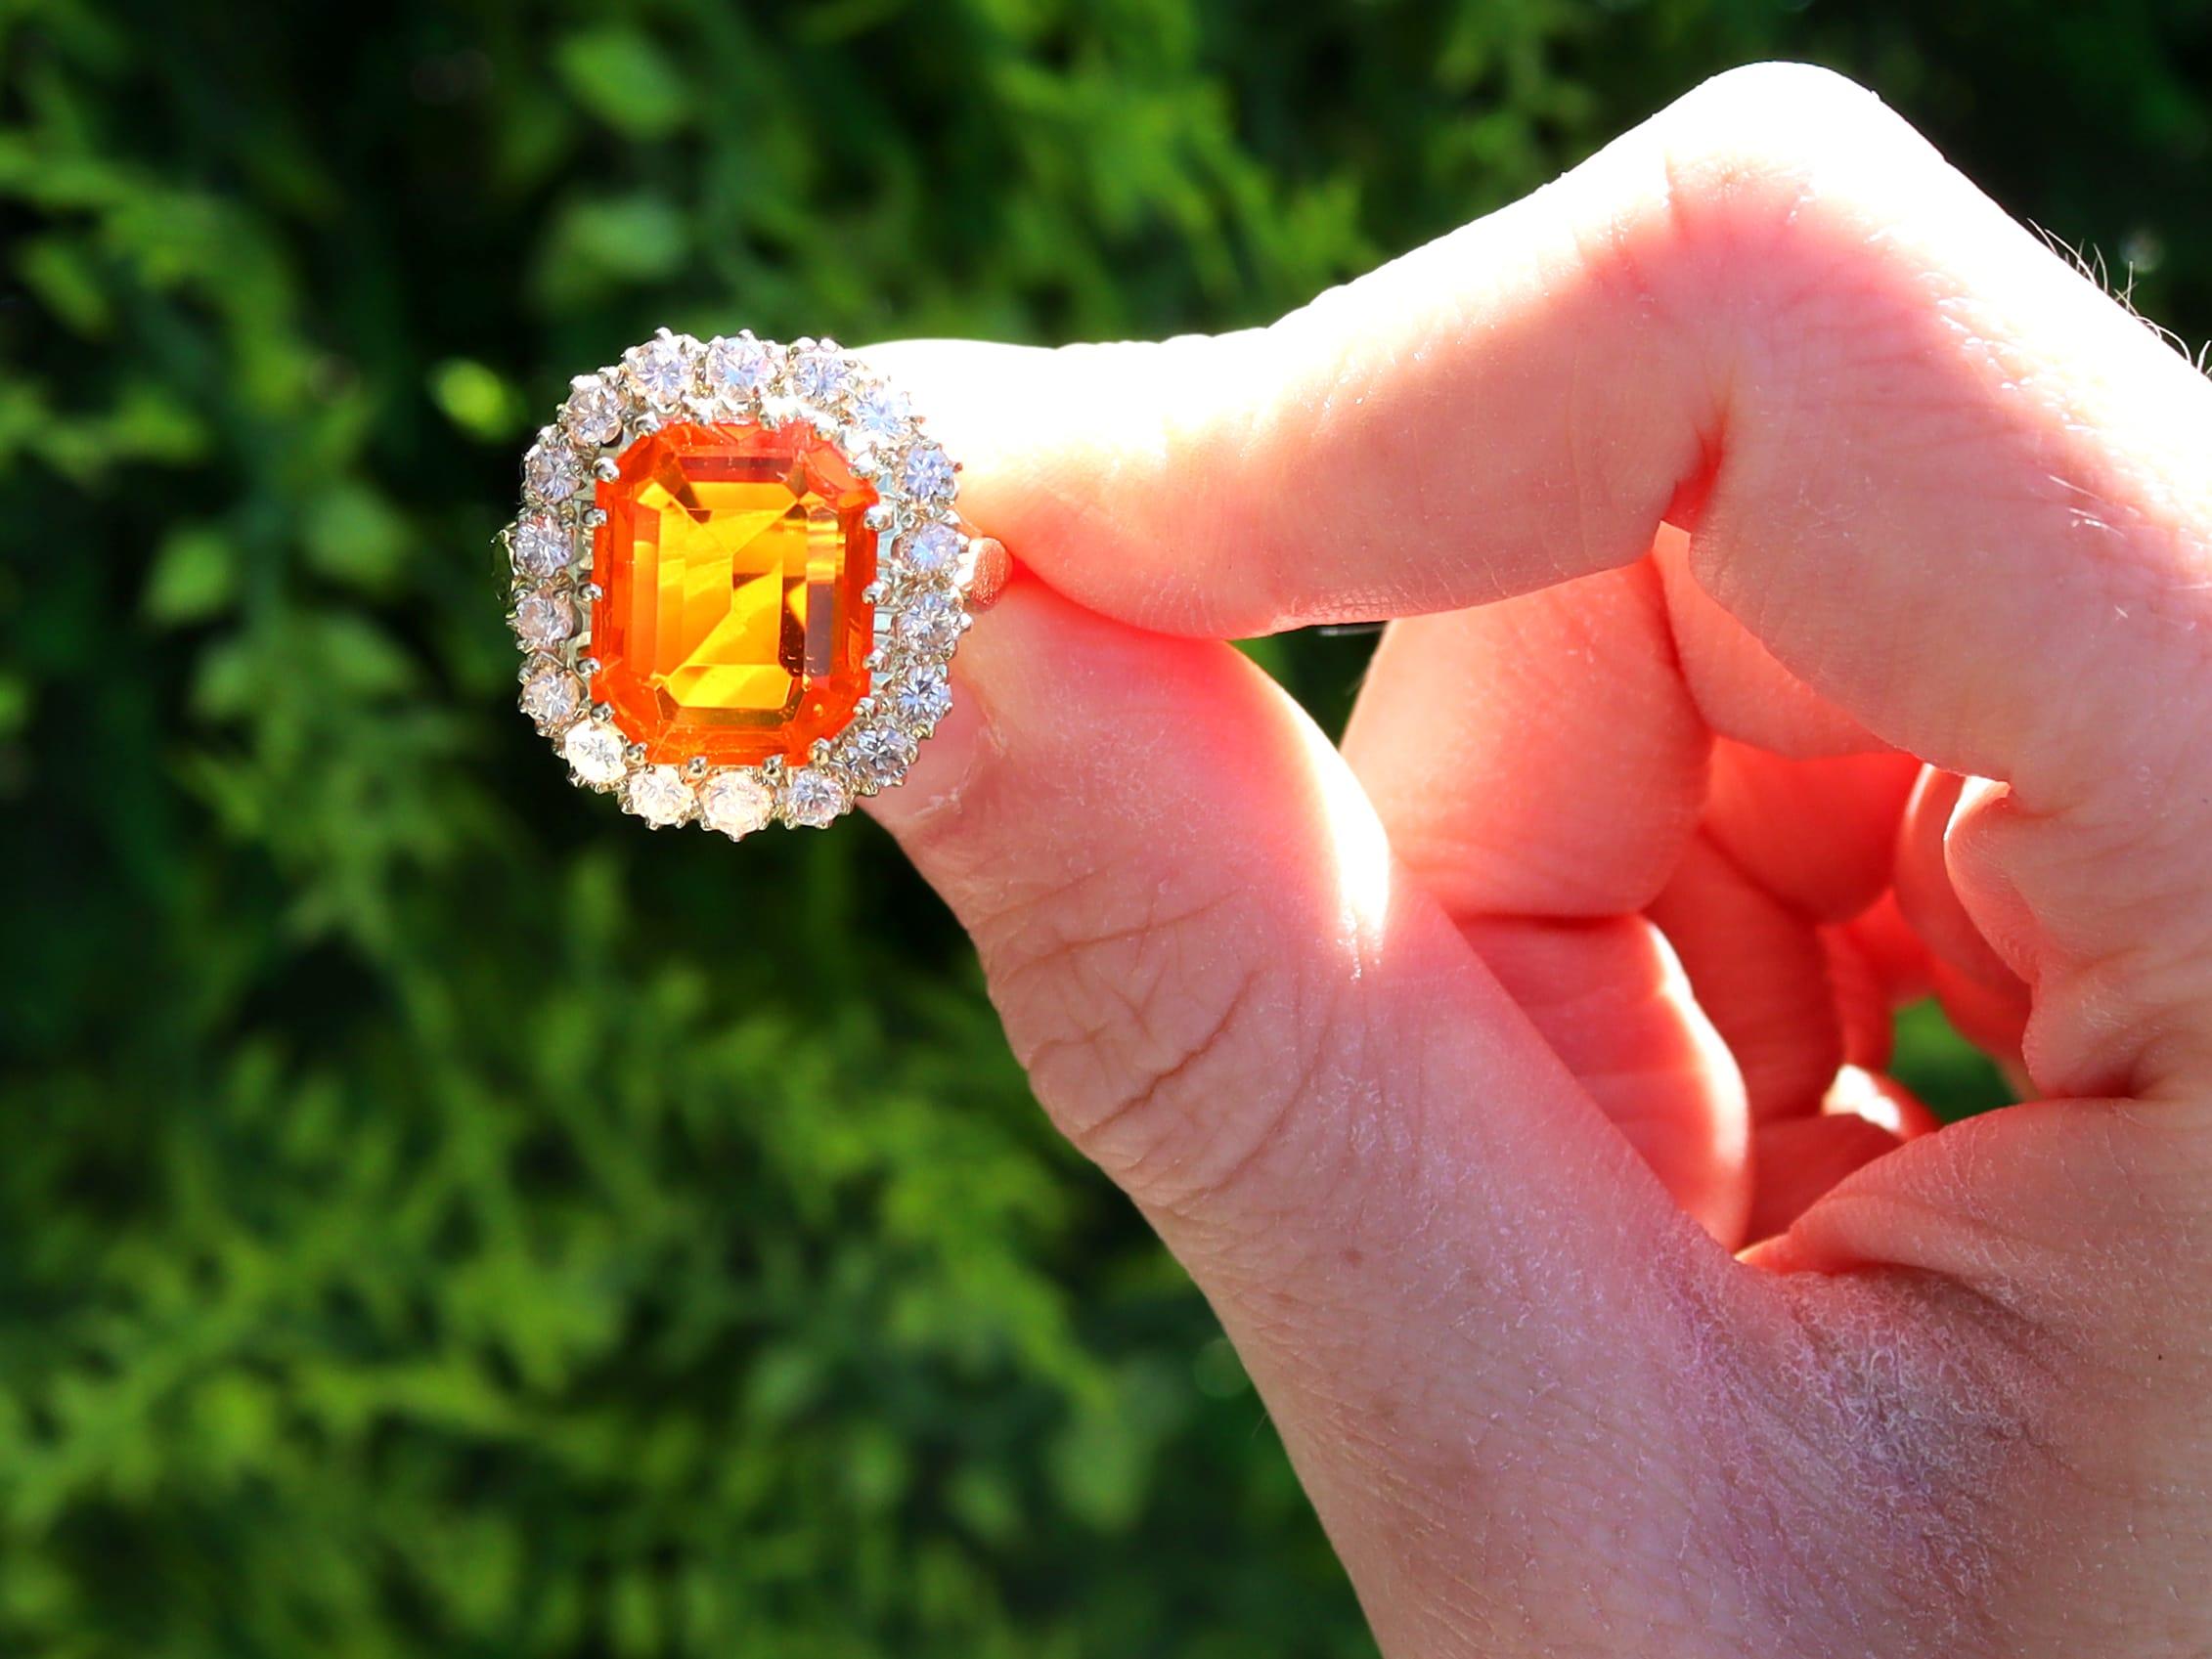 A stunning, fine and impressive vintage English 4.92 carat fire opal and 1 carat diamond, 18 karat yellow gold dress ring; part of our diverse vintage opal jewellery collections.

This stunning vintage opal engagement ring has been crafted in 18k